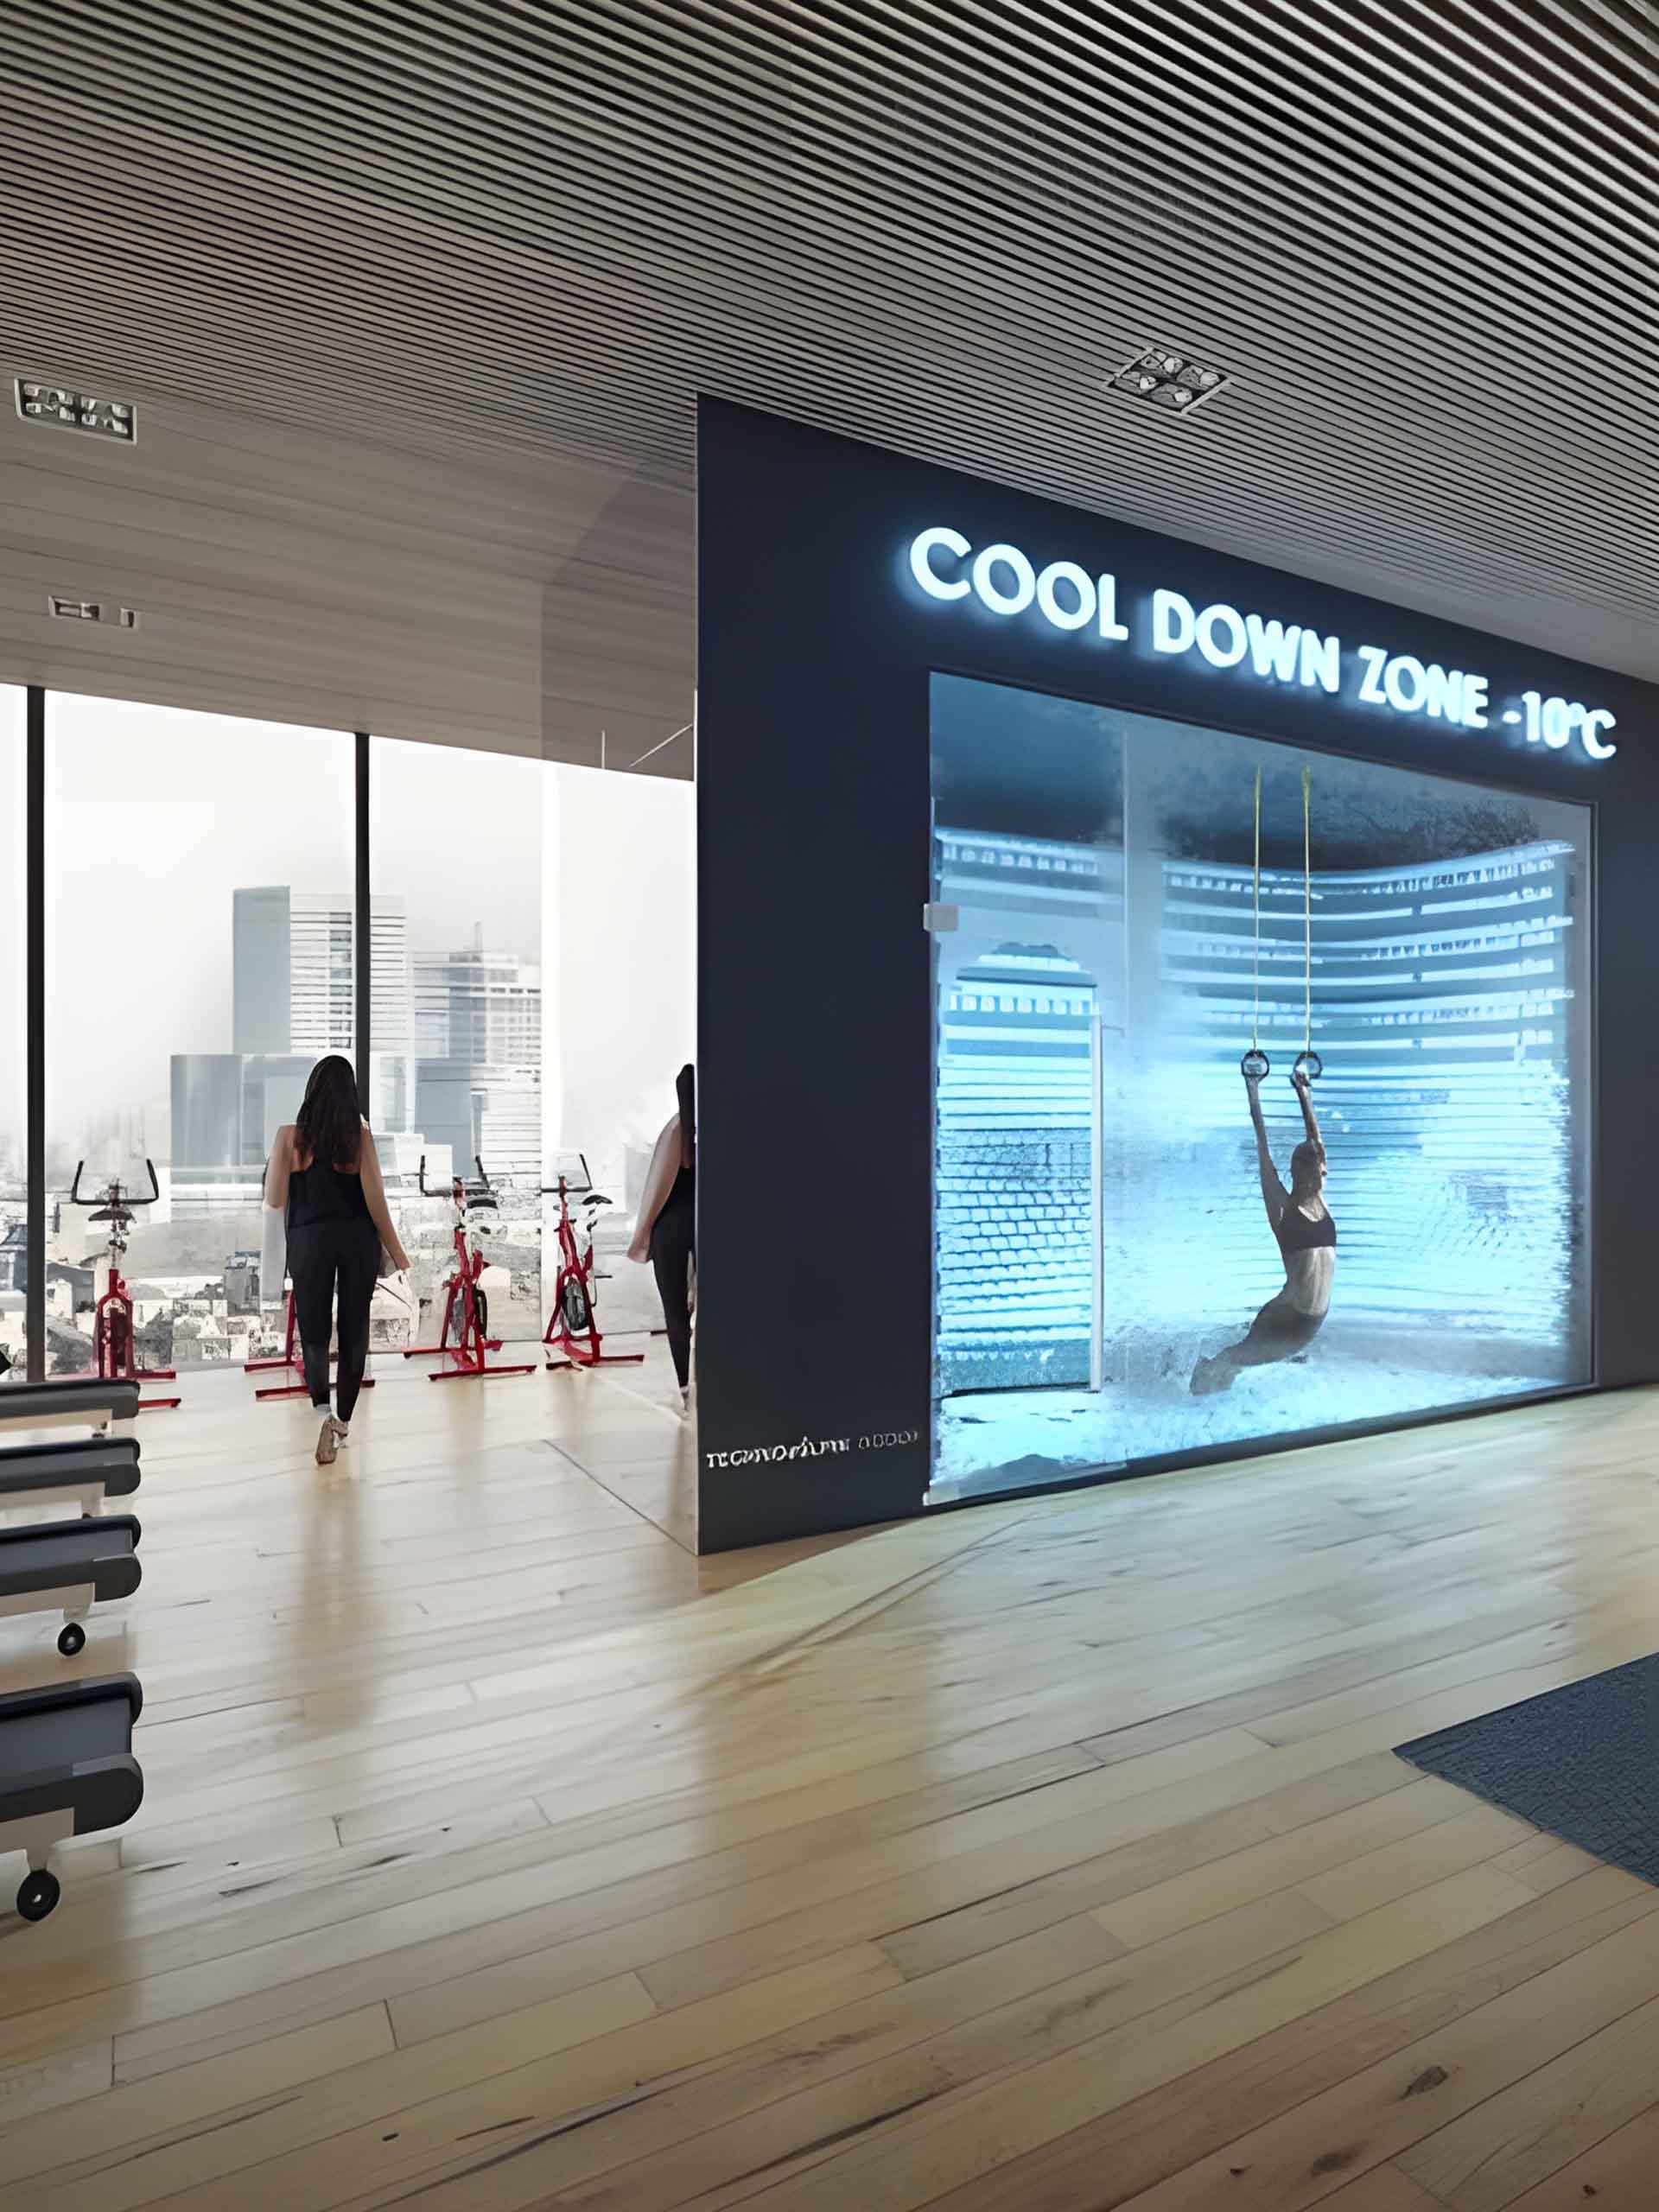 Amsterdam Fitness: Inspiring Gym Design, Build, and Cost-Efficiency